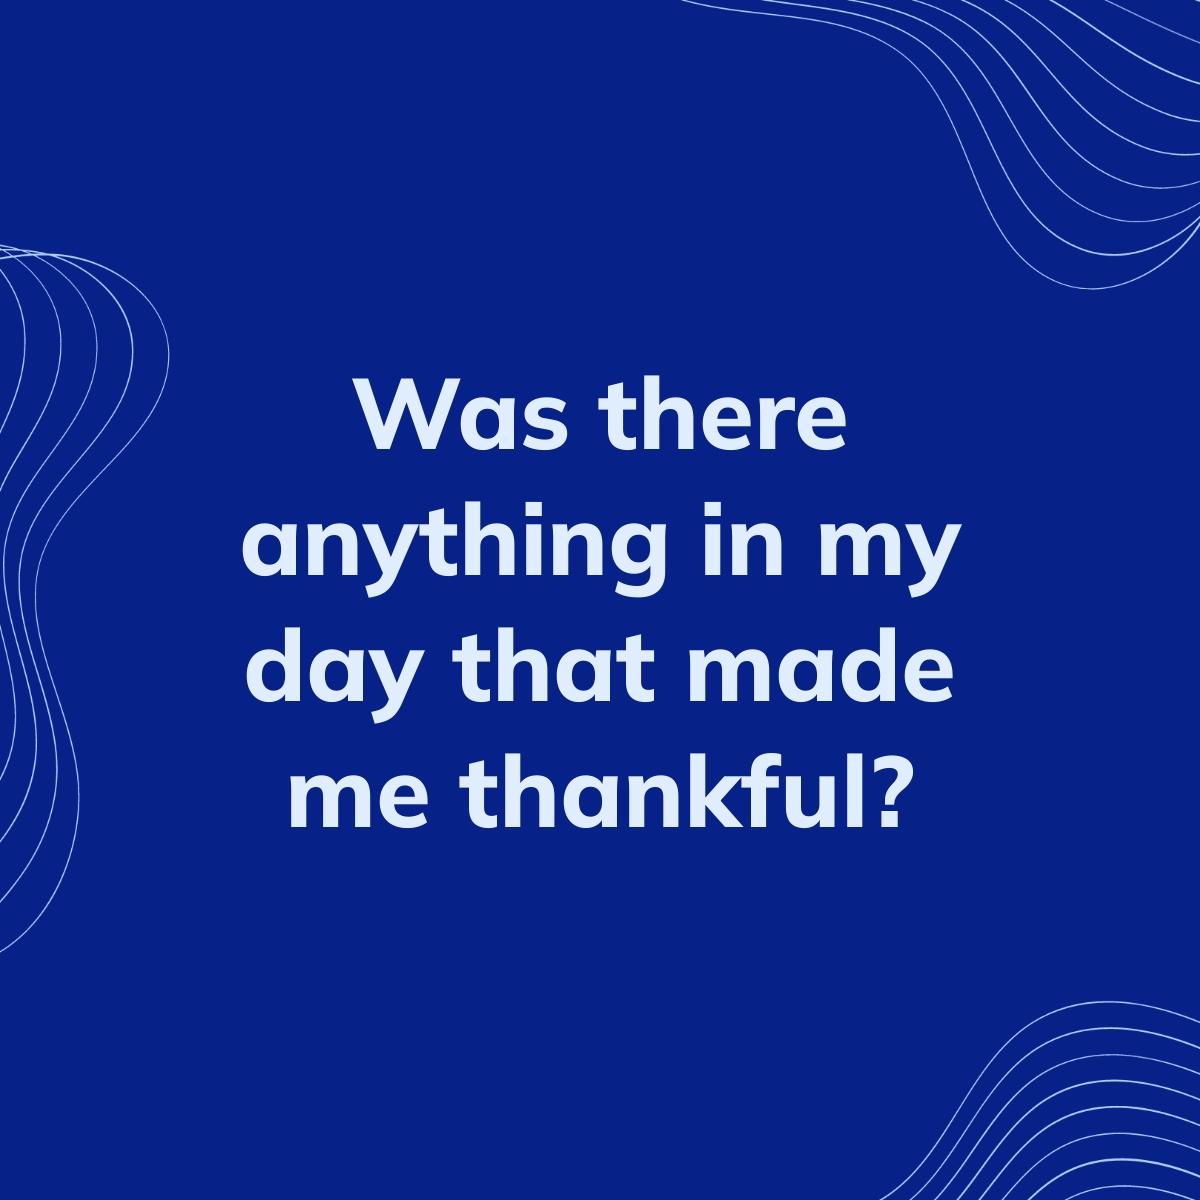 Journal Prompt: Was there anything in my day that made me thankful?